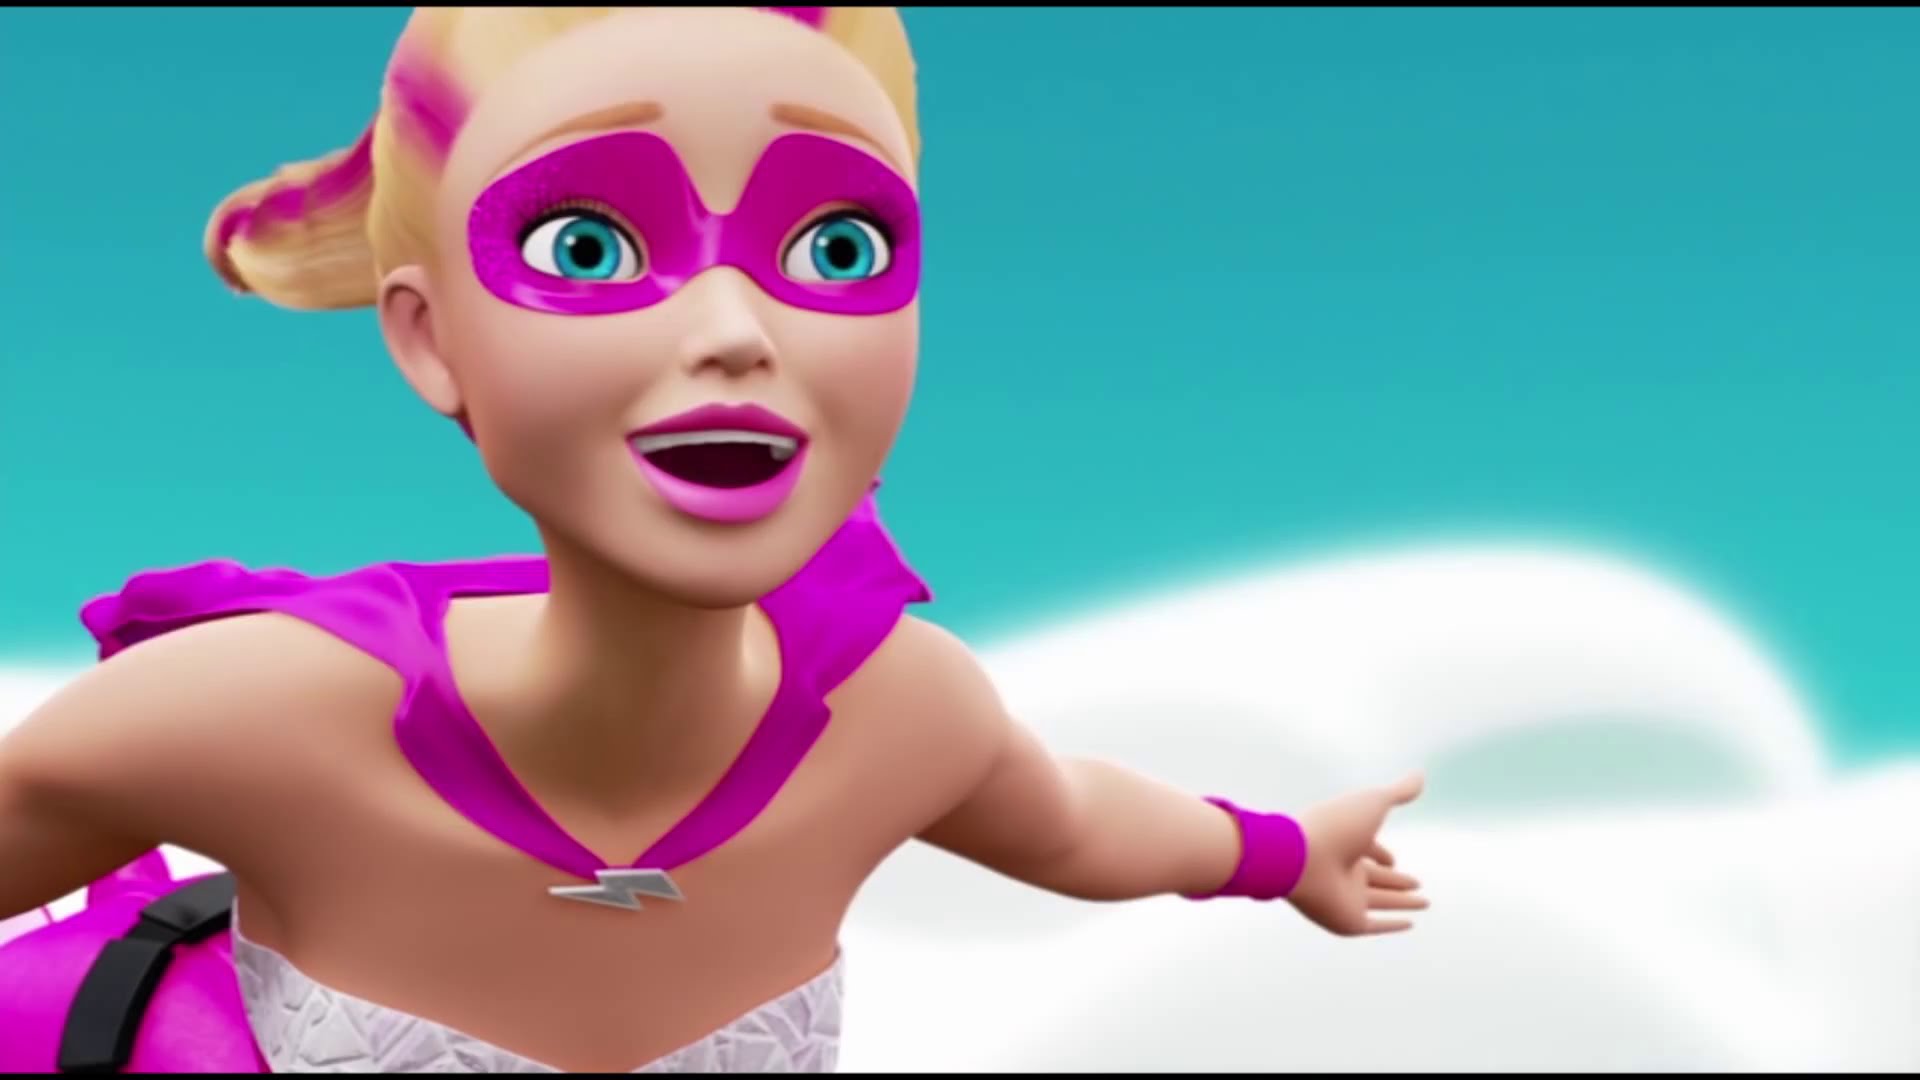 barbie in princess power full movie in english